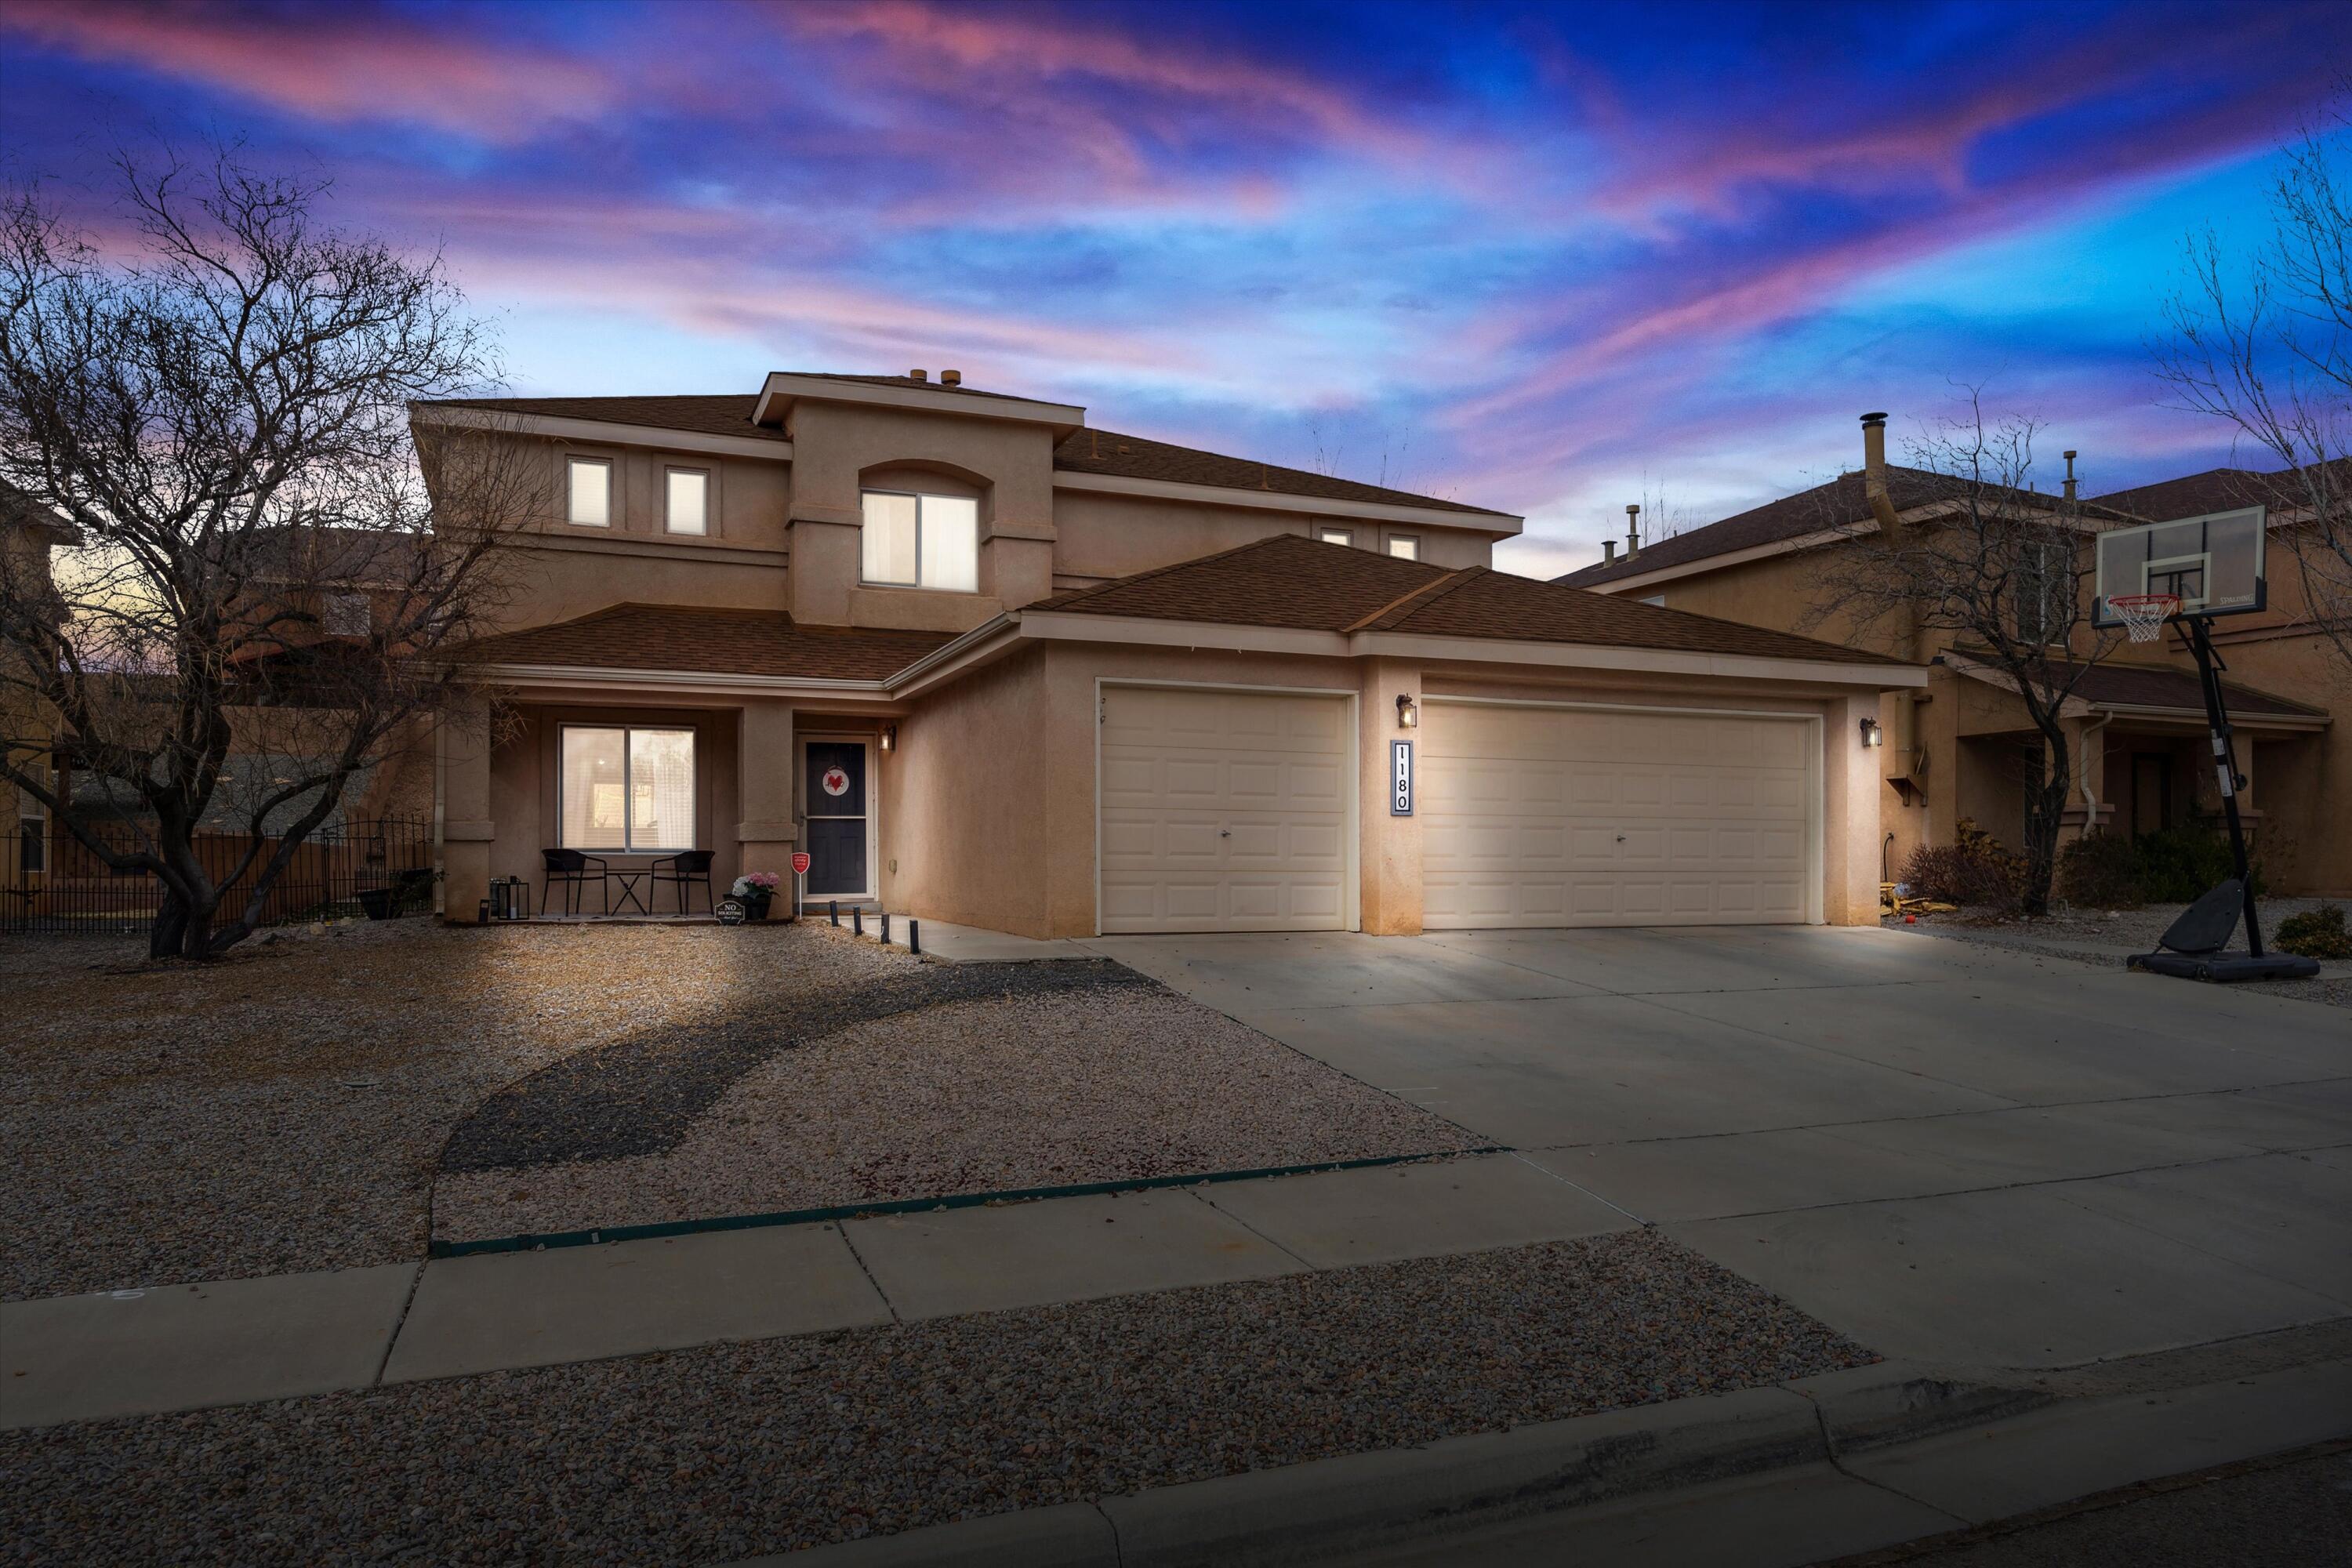 Great Los Lunas location. Close to shopping, schools, restaurants and easy highway access. Beautiful, well maintained home with some upgrades to boot. This is one of the few in the neighborhood that has the master bedroom on the 1st level. The second level offers a huge additional living area/game room.  3 car garage is pefect to fit all your toys or to utilize some of it as a workout/hobby area. Make this home yours while it is still available.